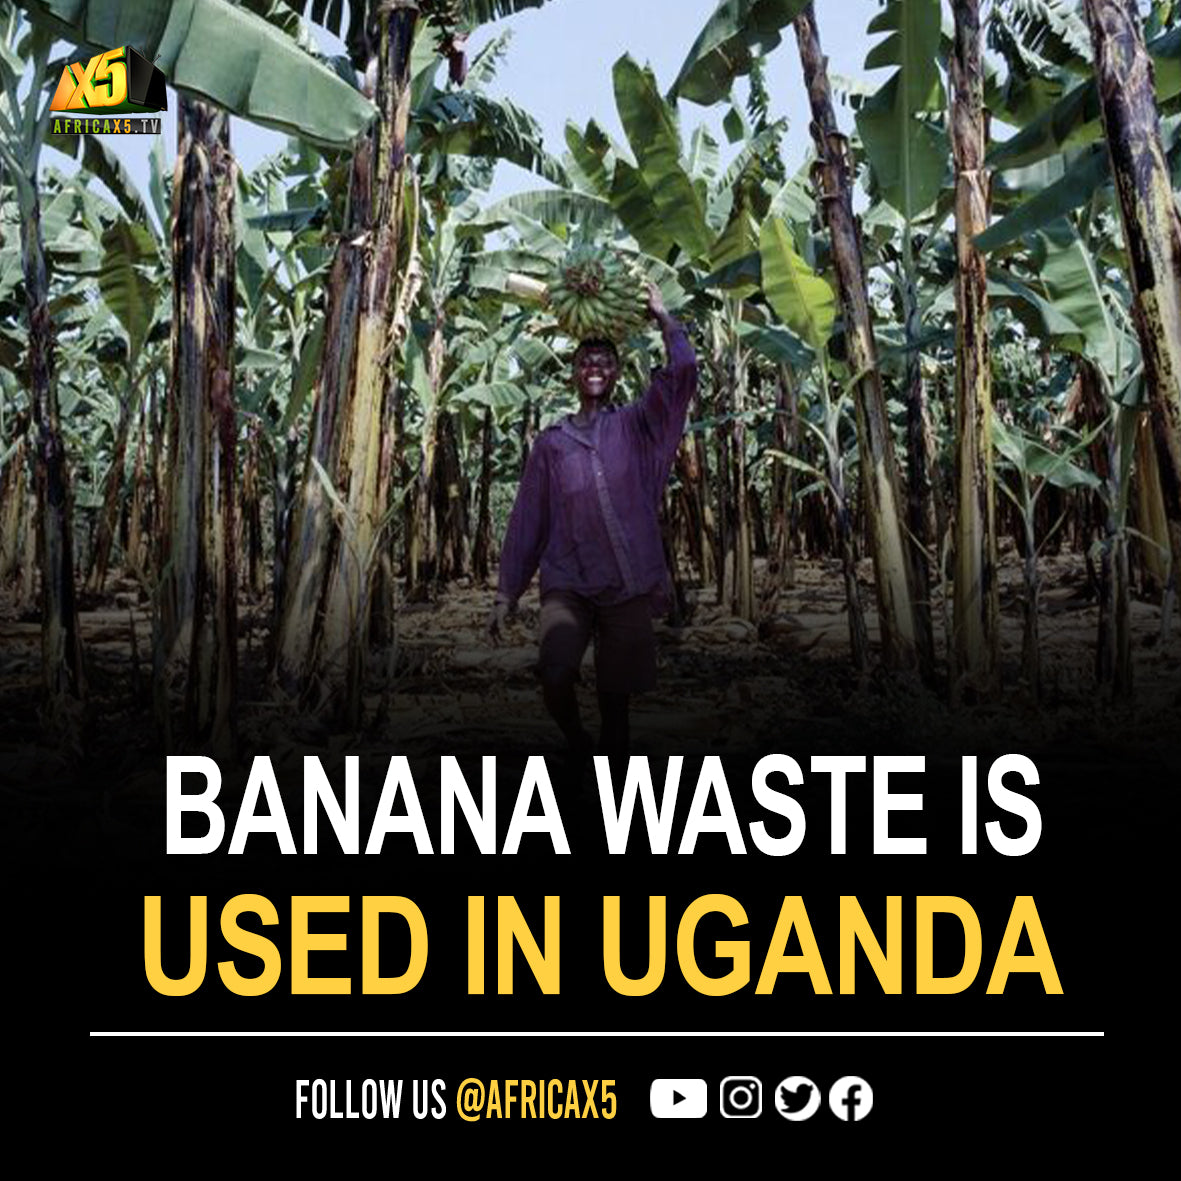 Bananas are the world's most wasted crop, but this Uganda company is creating ways for change.